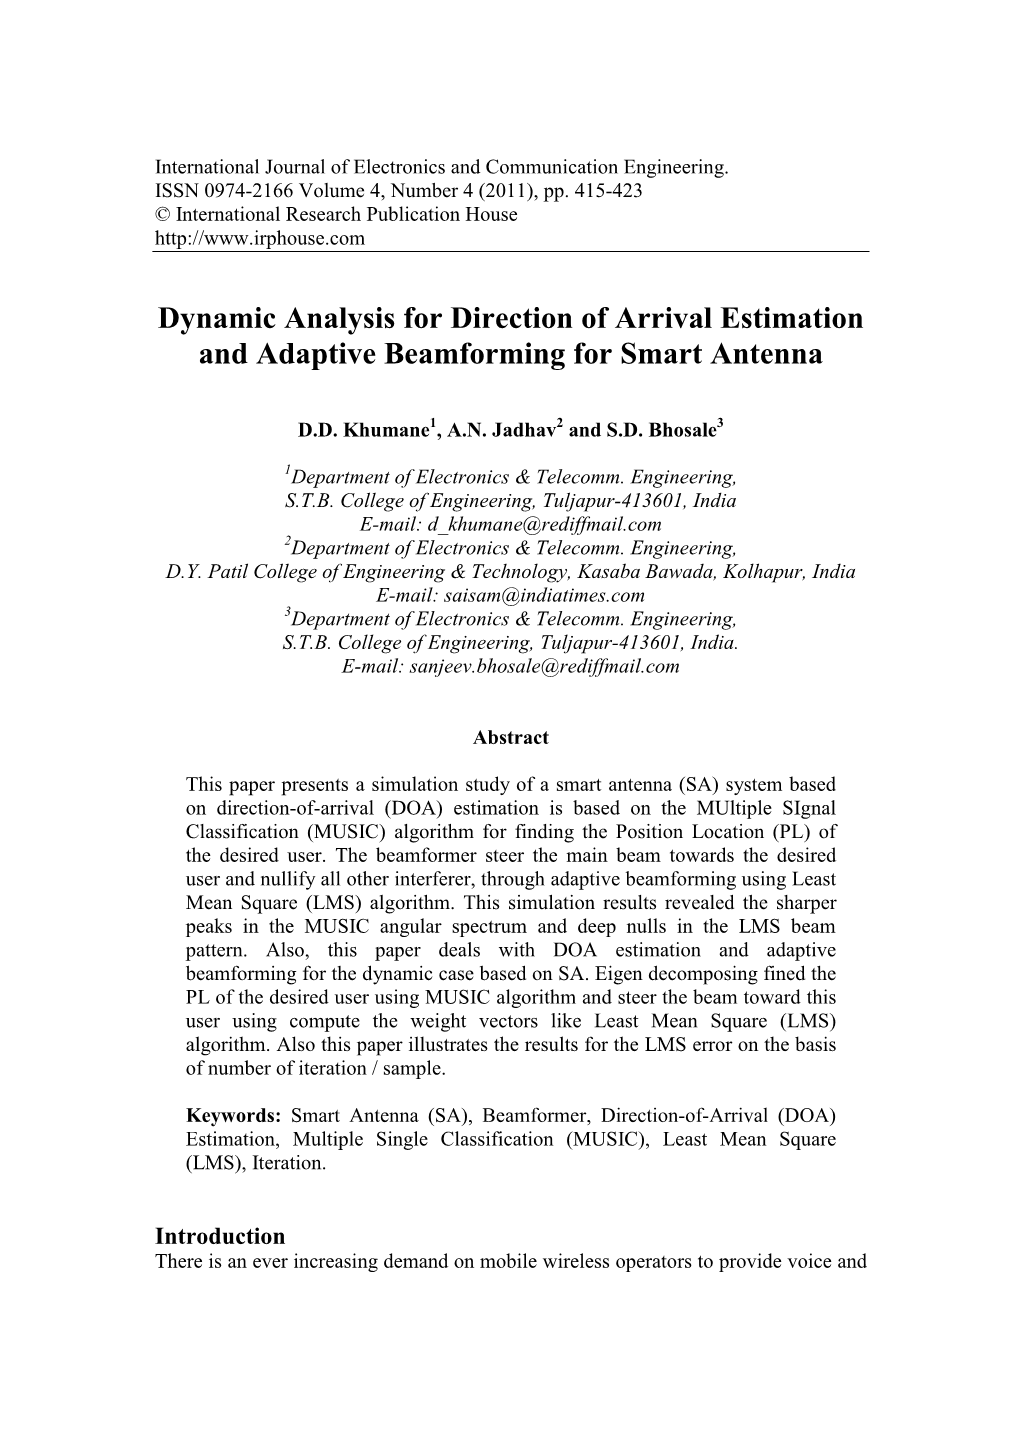 Dynamic Analysis for Direction of Arrival Estimation and Adaptive Beamforming for Smart Antenna